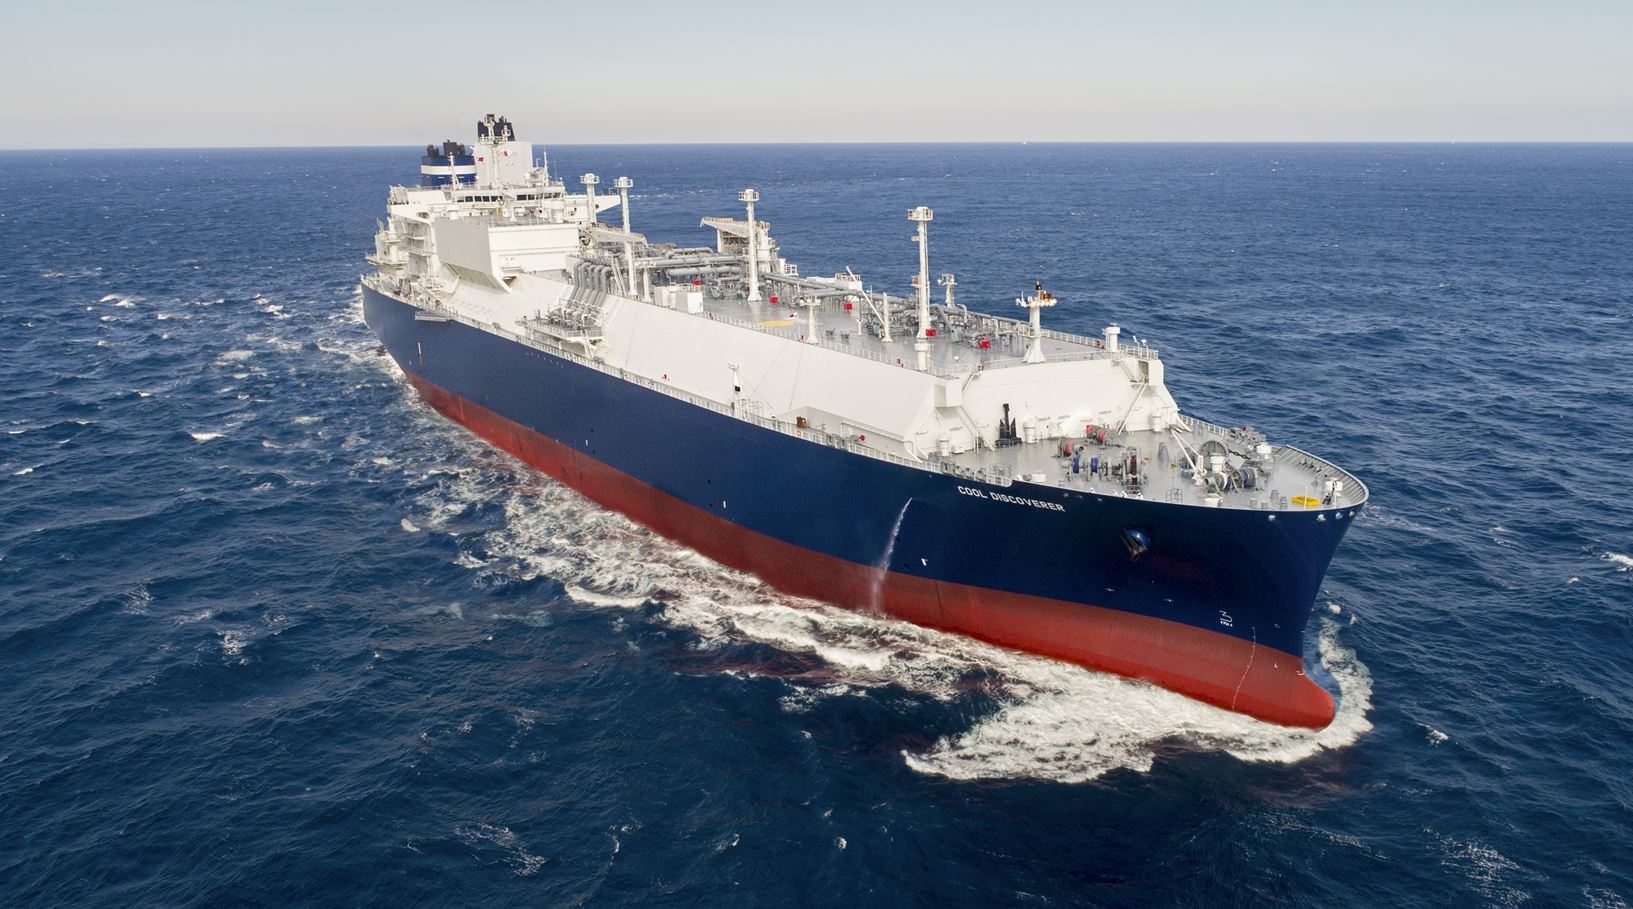 Thenemaris takes delivery of LNG newbuild